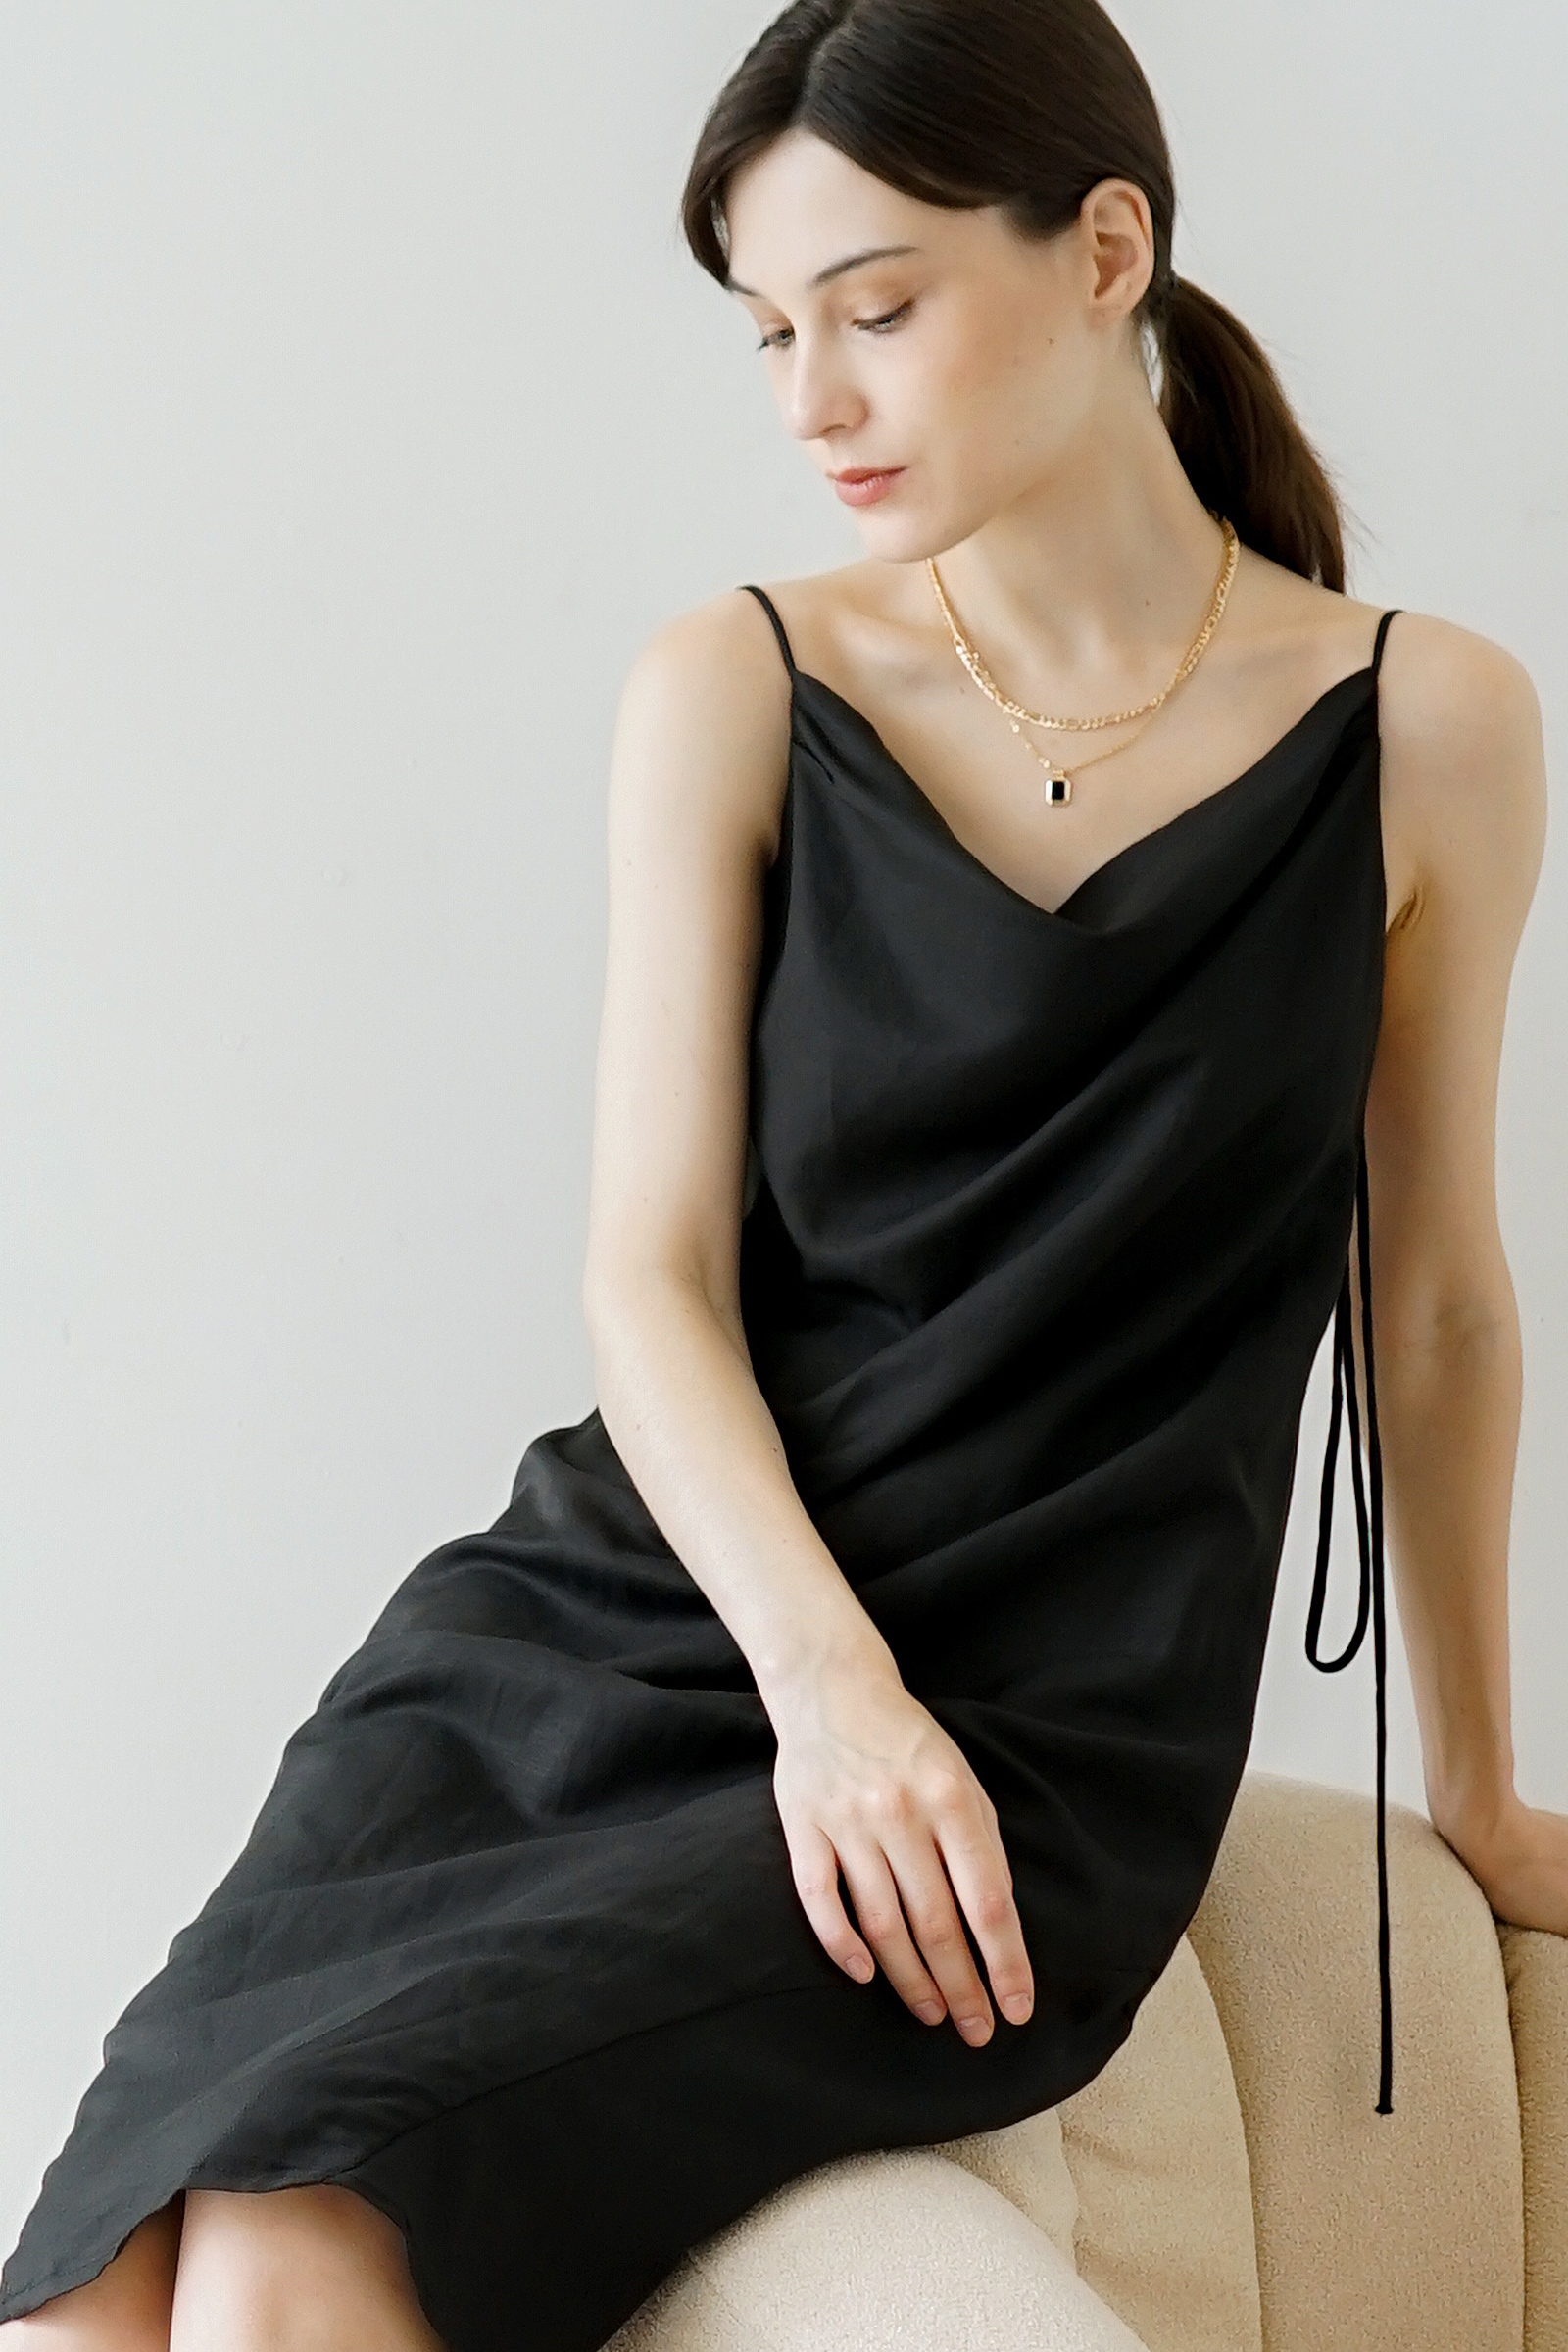 Picture of Sorin Dress Black